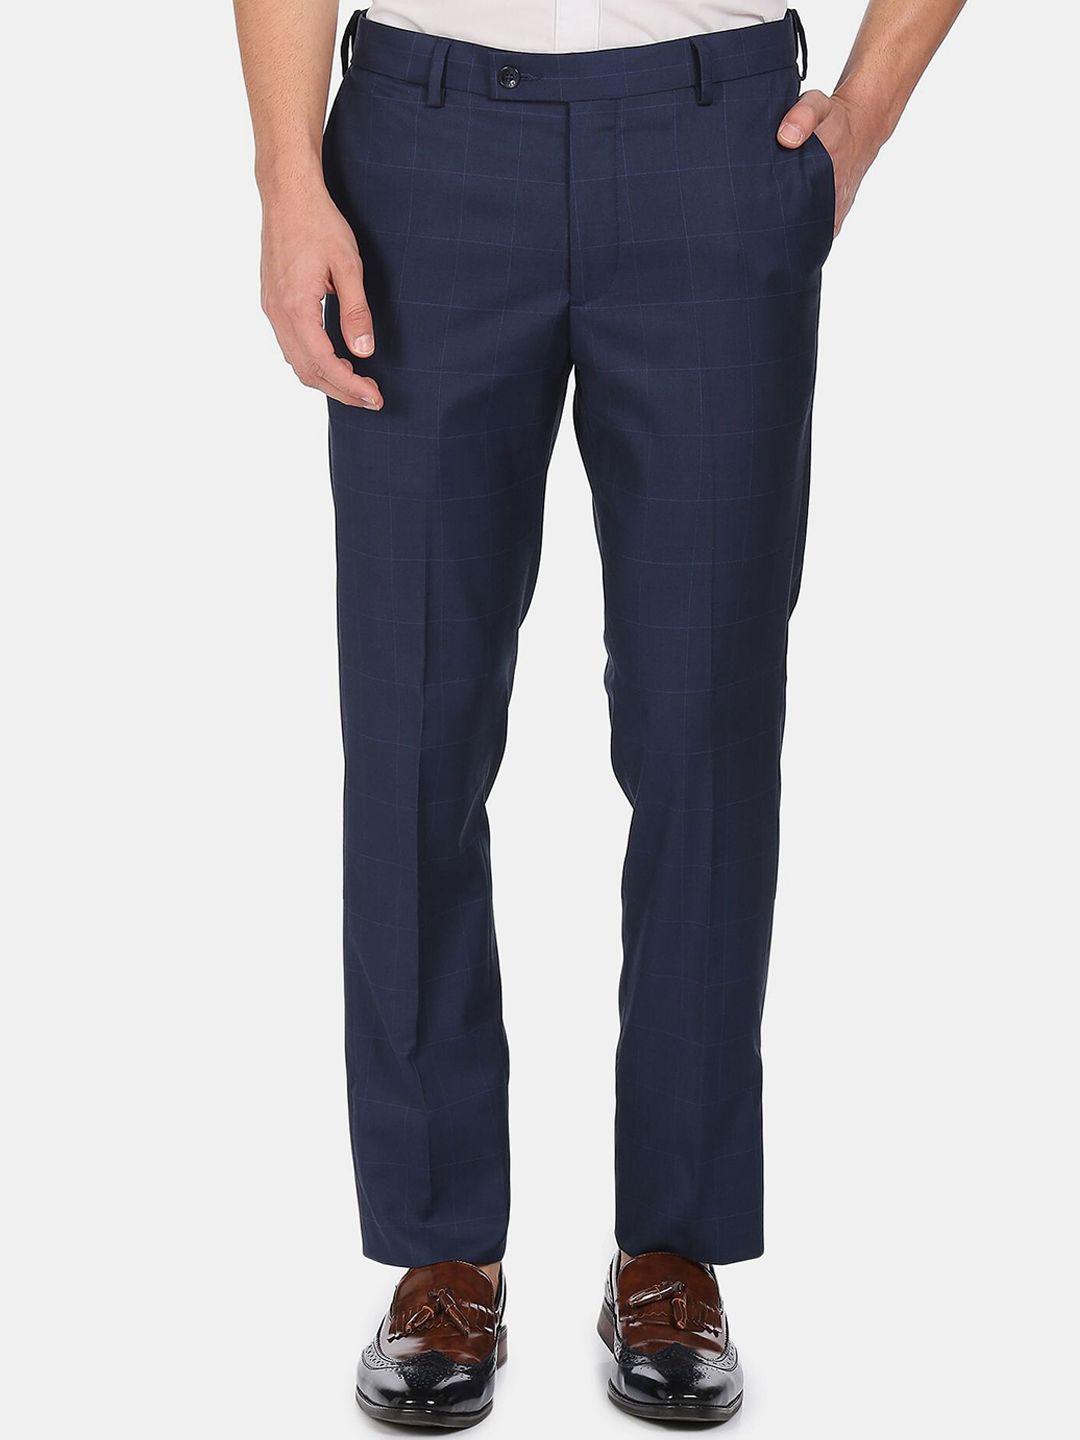 arrow men navy blue checked trousers